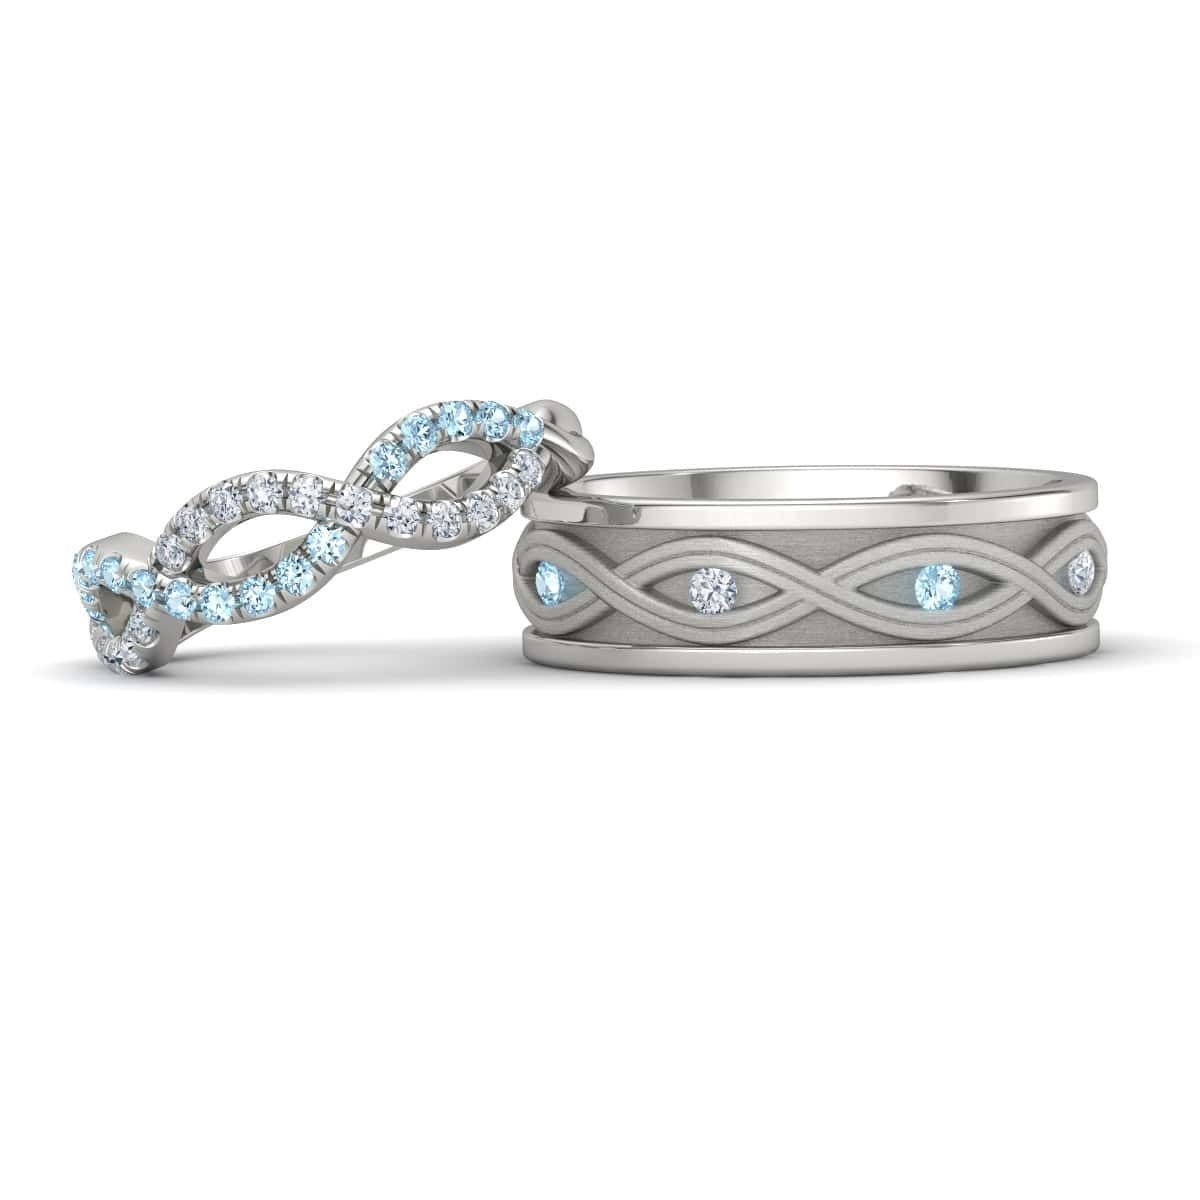 Matching Wedding Bands | Gemvara Within Current His And Hers Anniversary Rings (View 18 of 25)